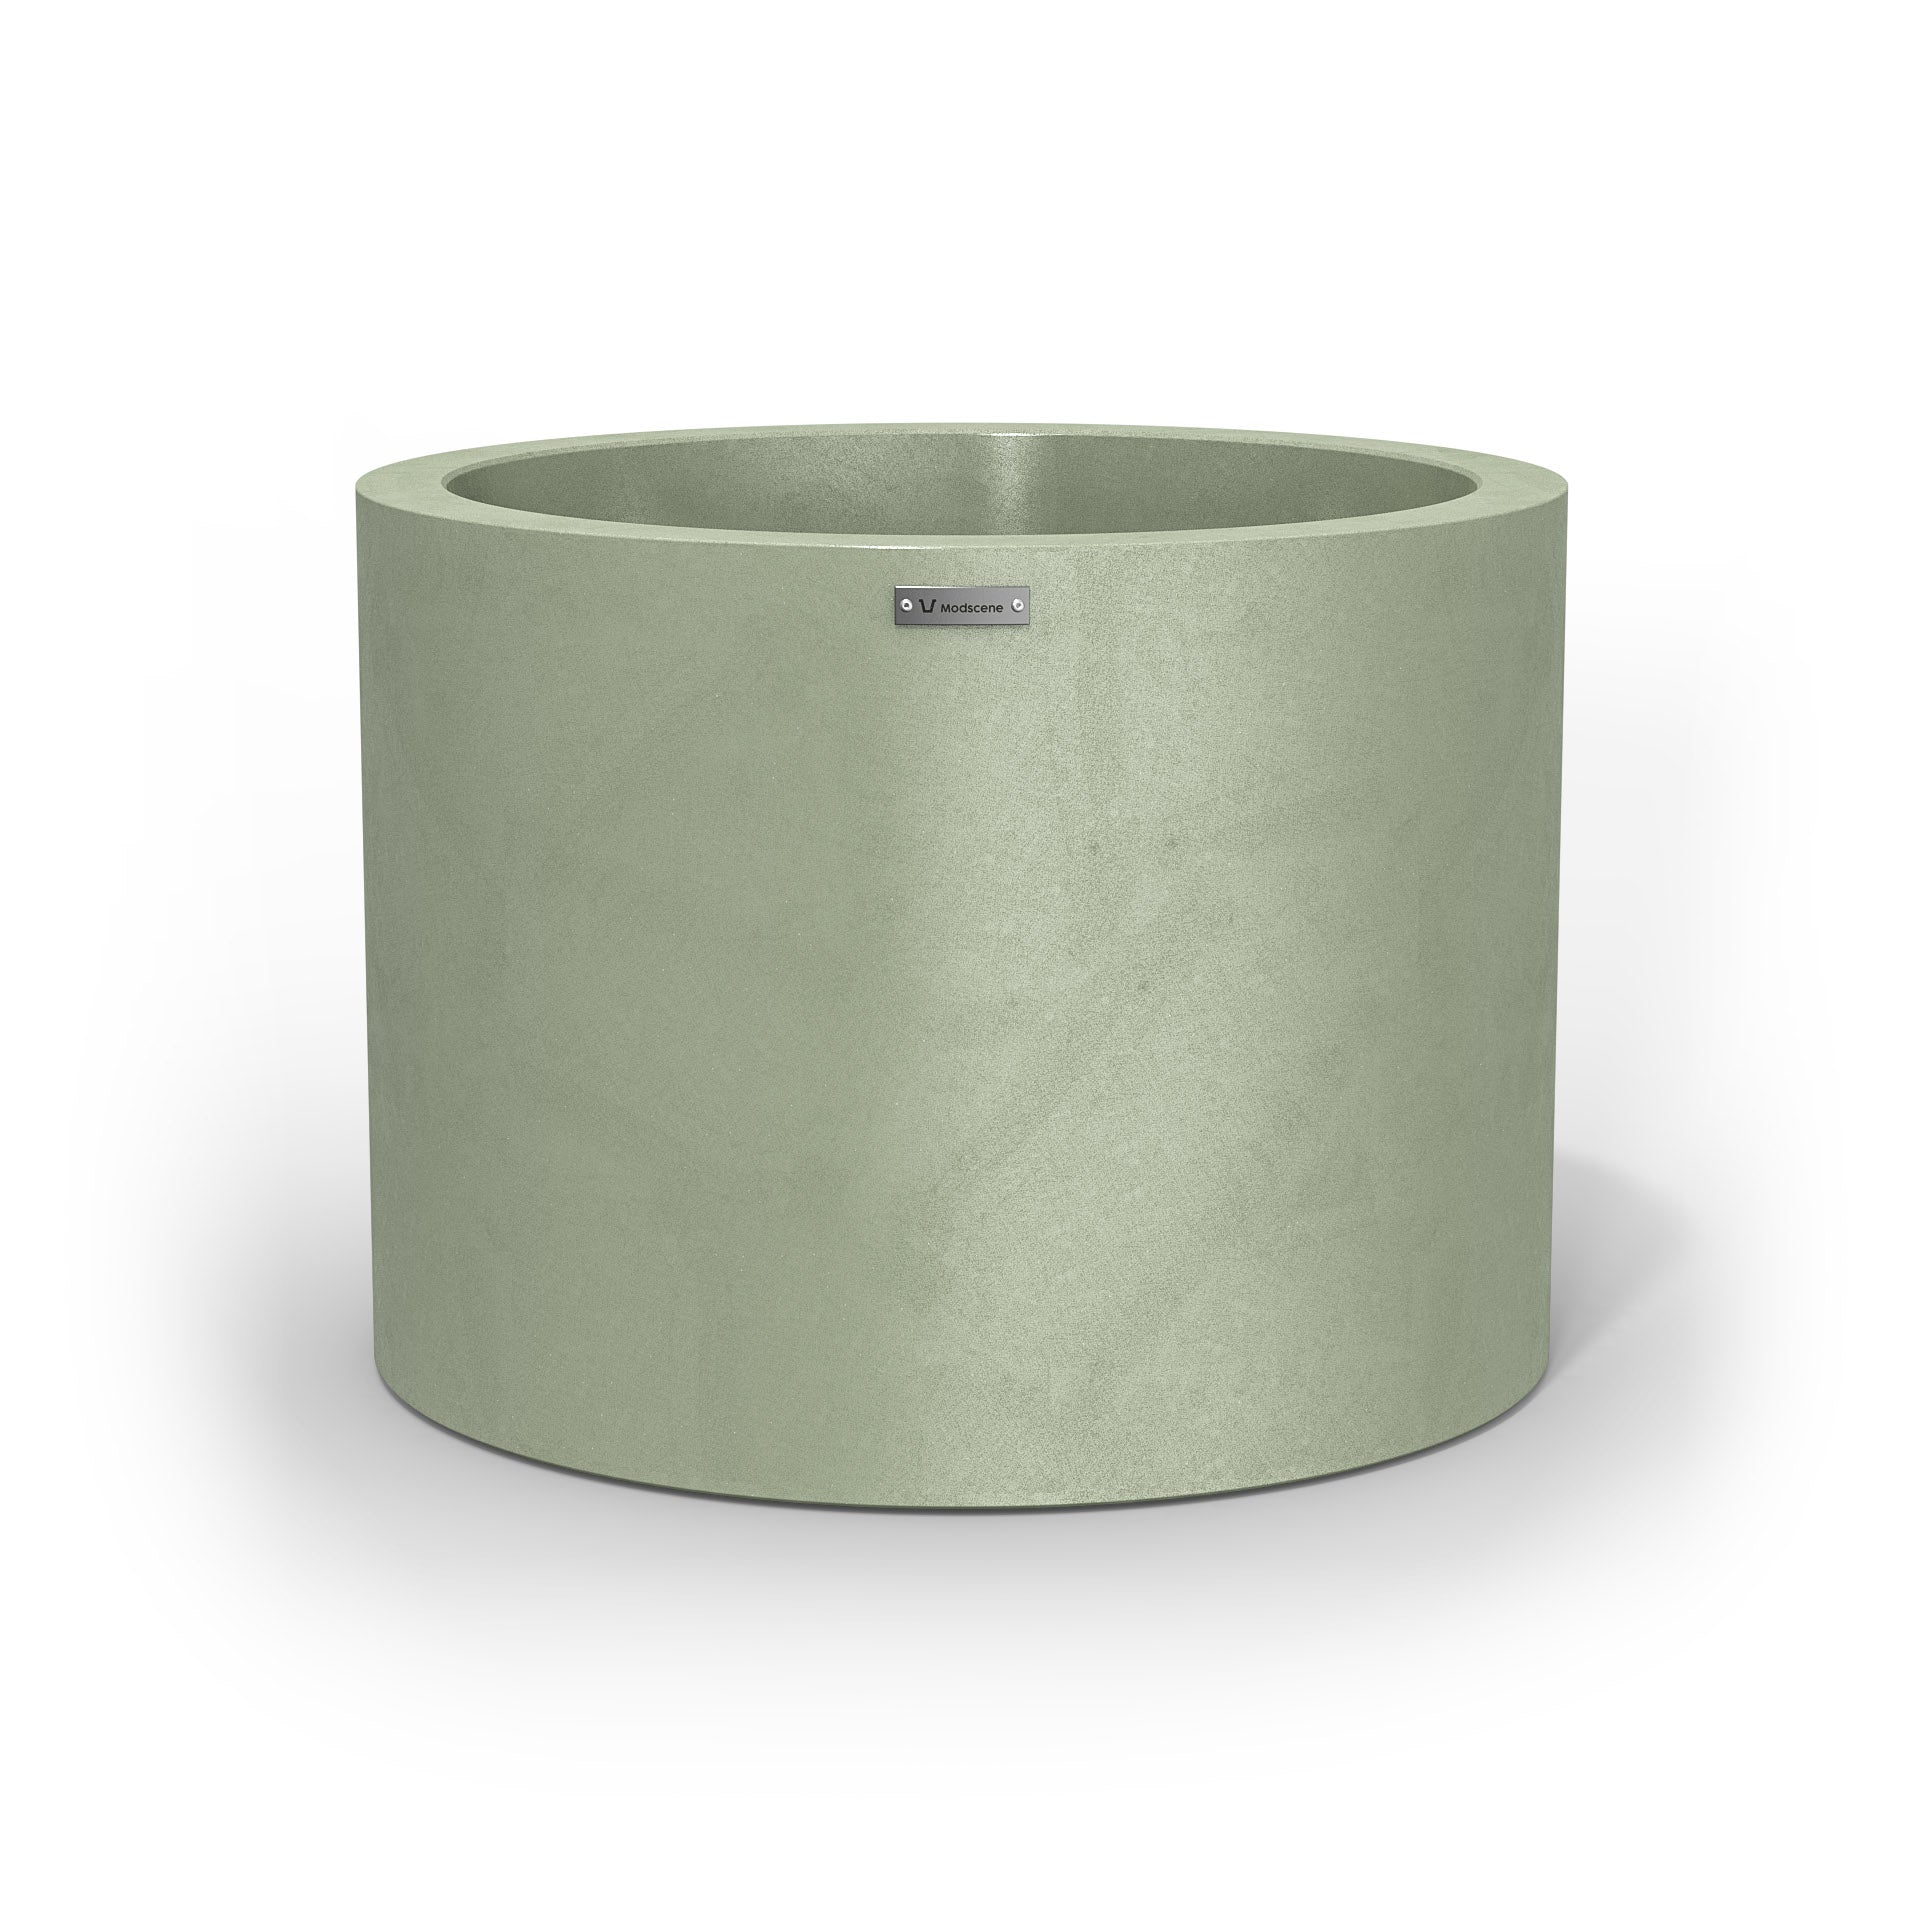 A cylinder shaped pot planter in a pastel green colour.